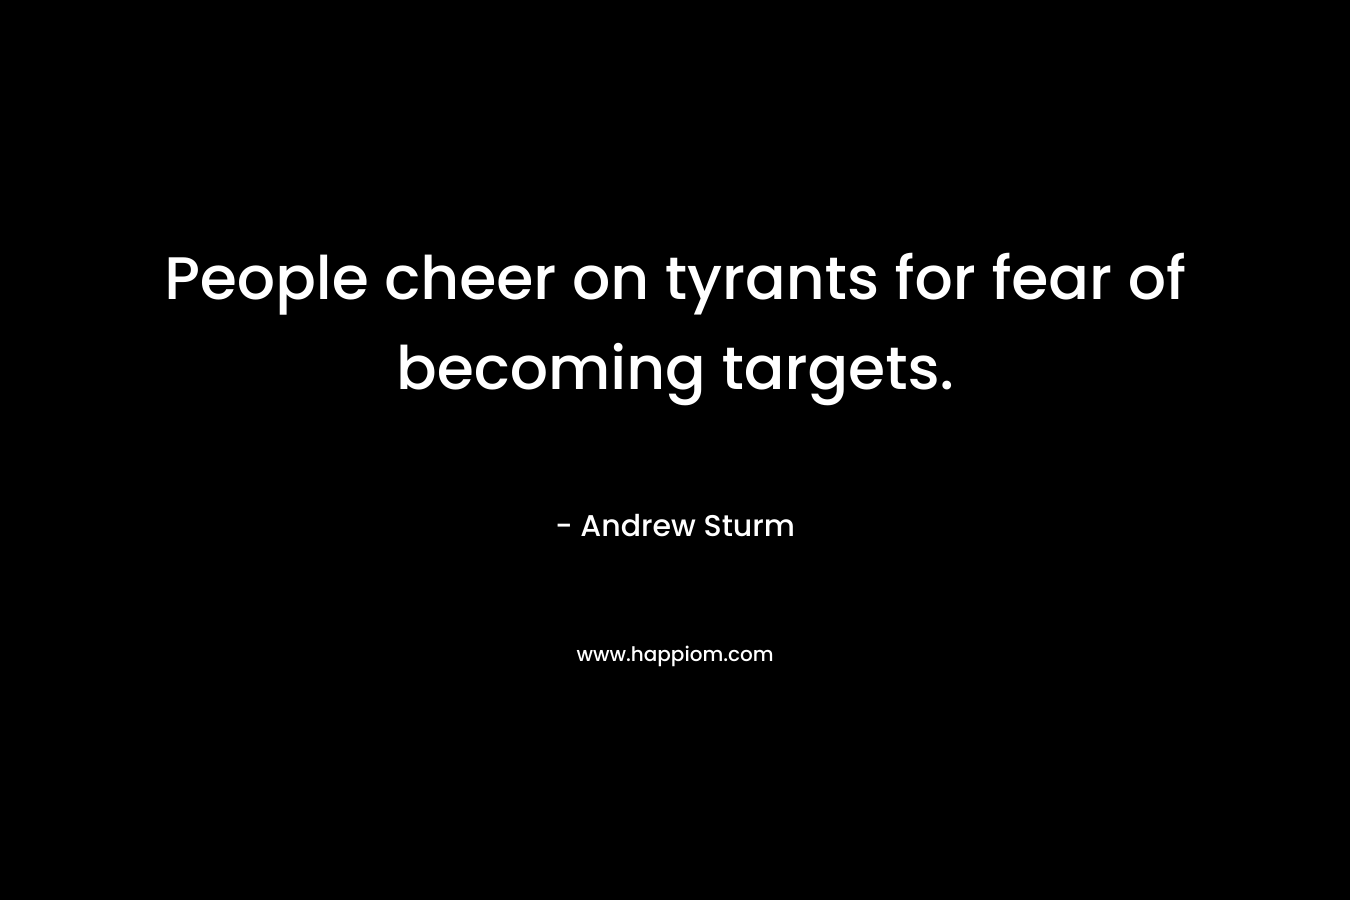 People cheer on tyrants for fear of becoming targets.